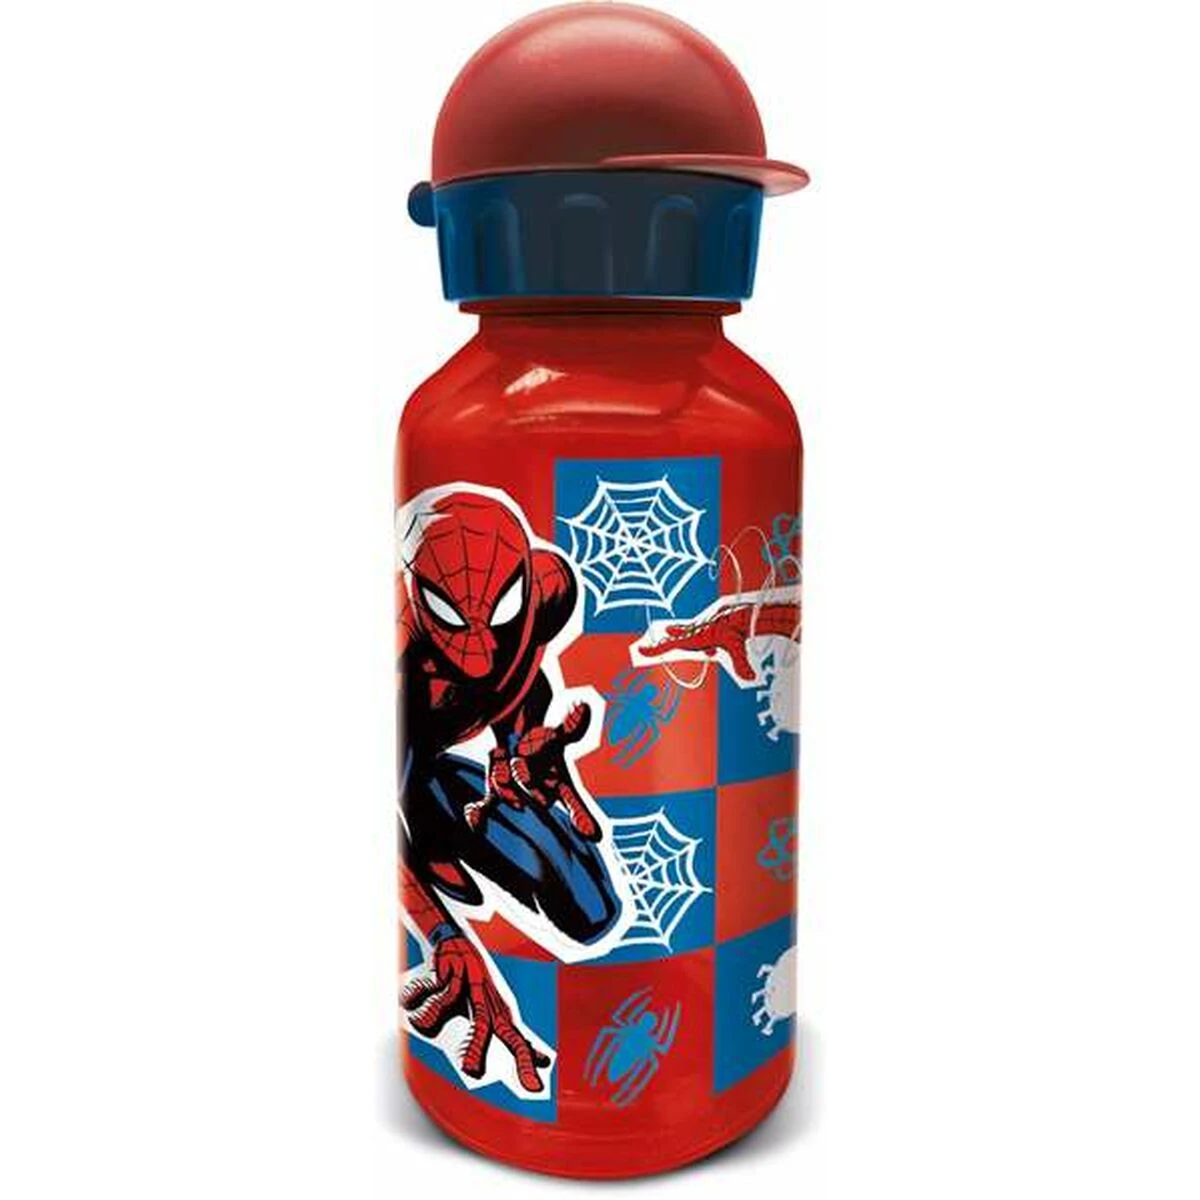 Red Spider-Man themed water bottle